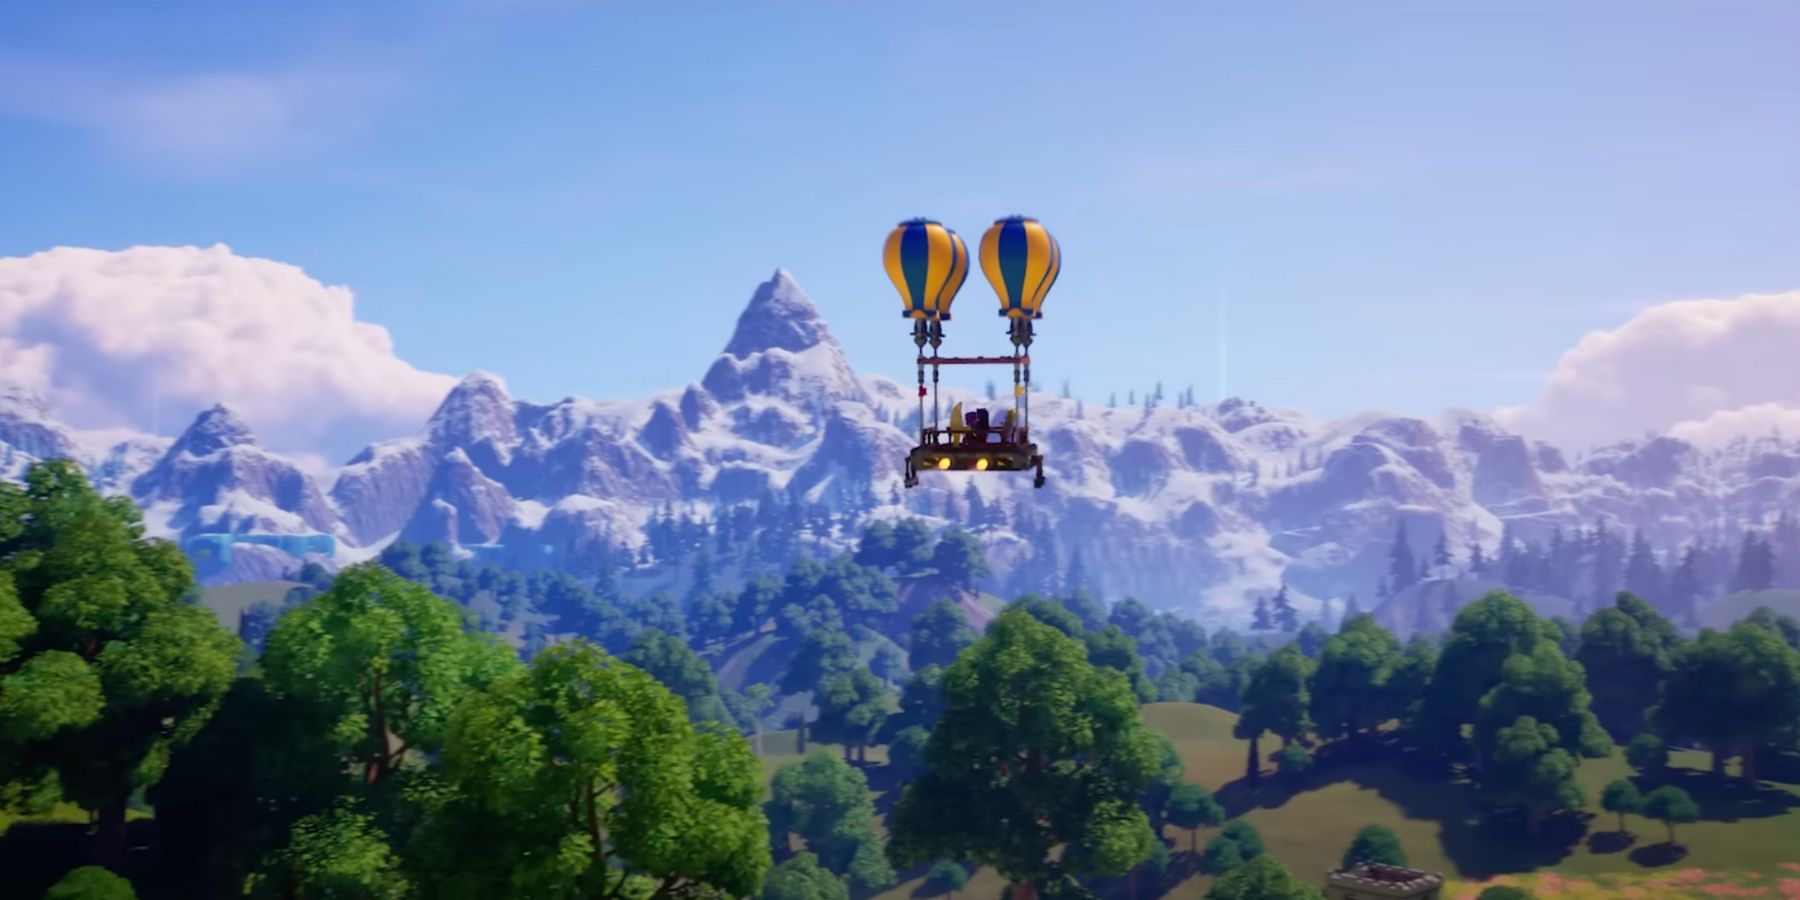 Lego Fortnite: characters are traveling around the world